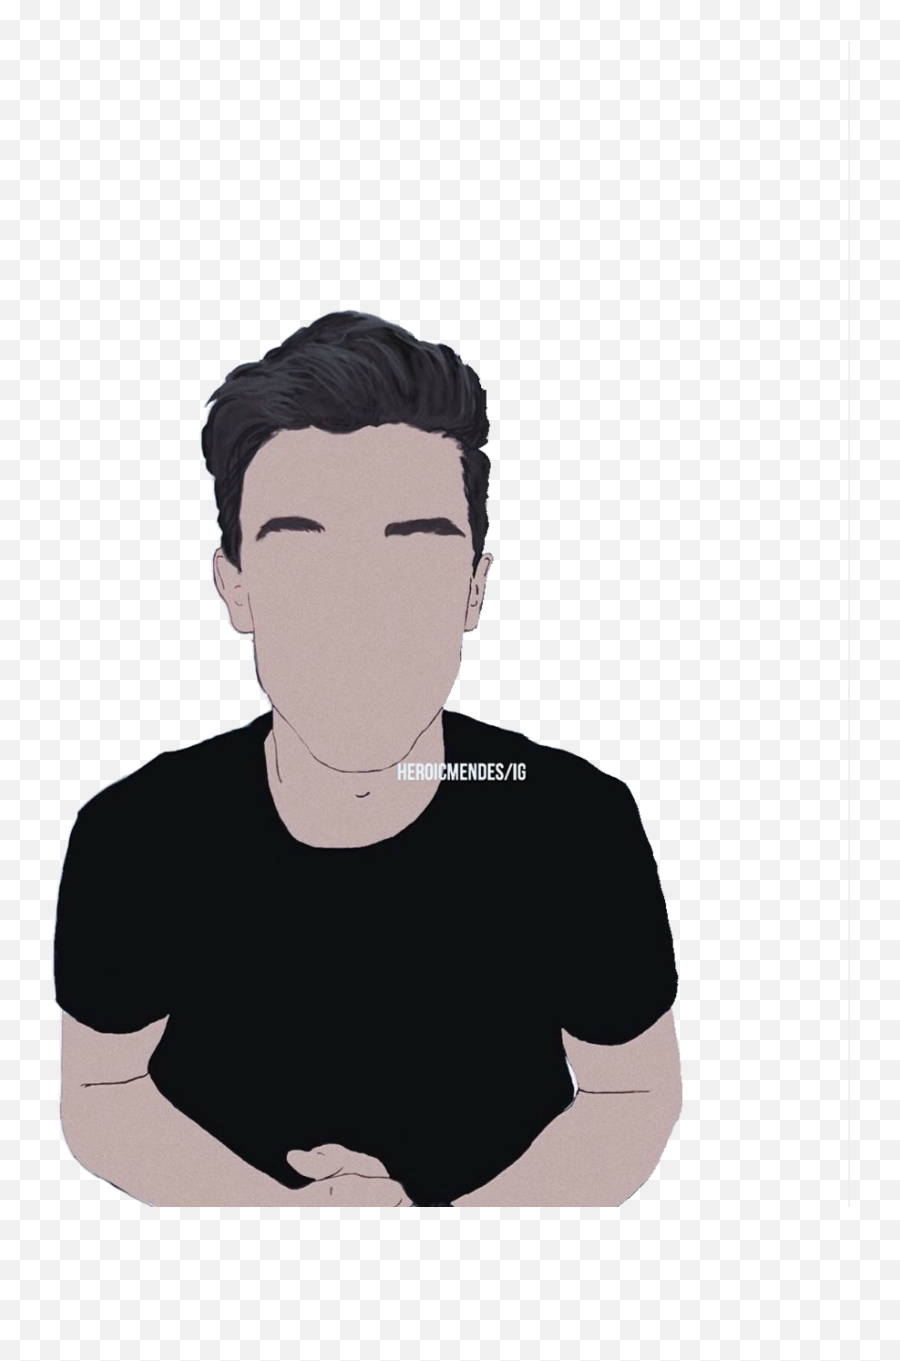 Shawn Mendes Png Shared - Cartoon Shawn Mendes,Shawn Mendes Png